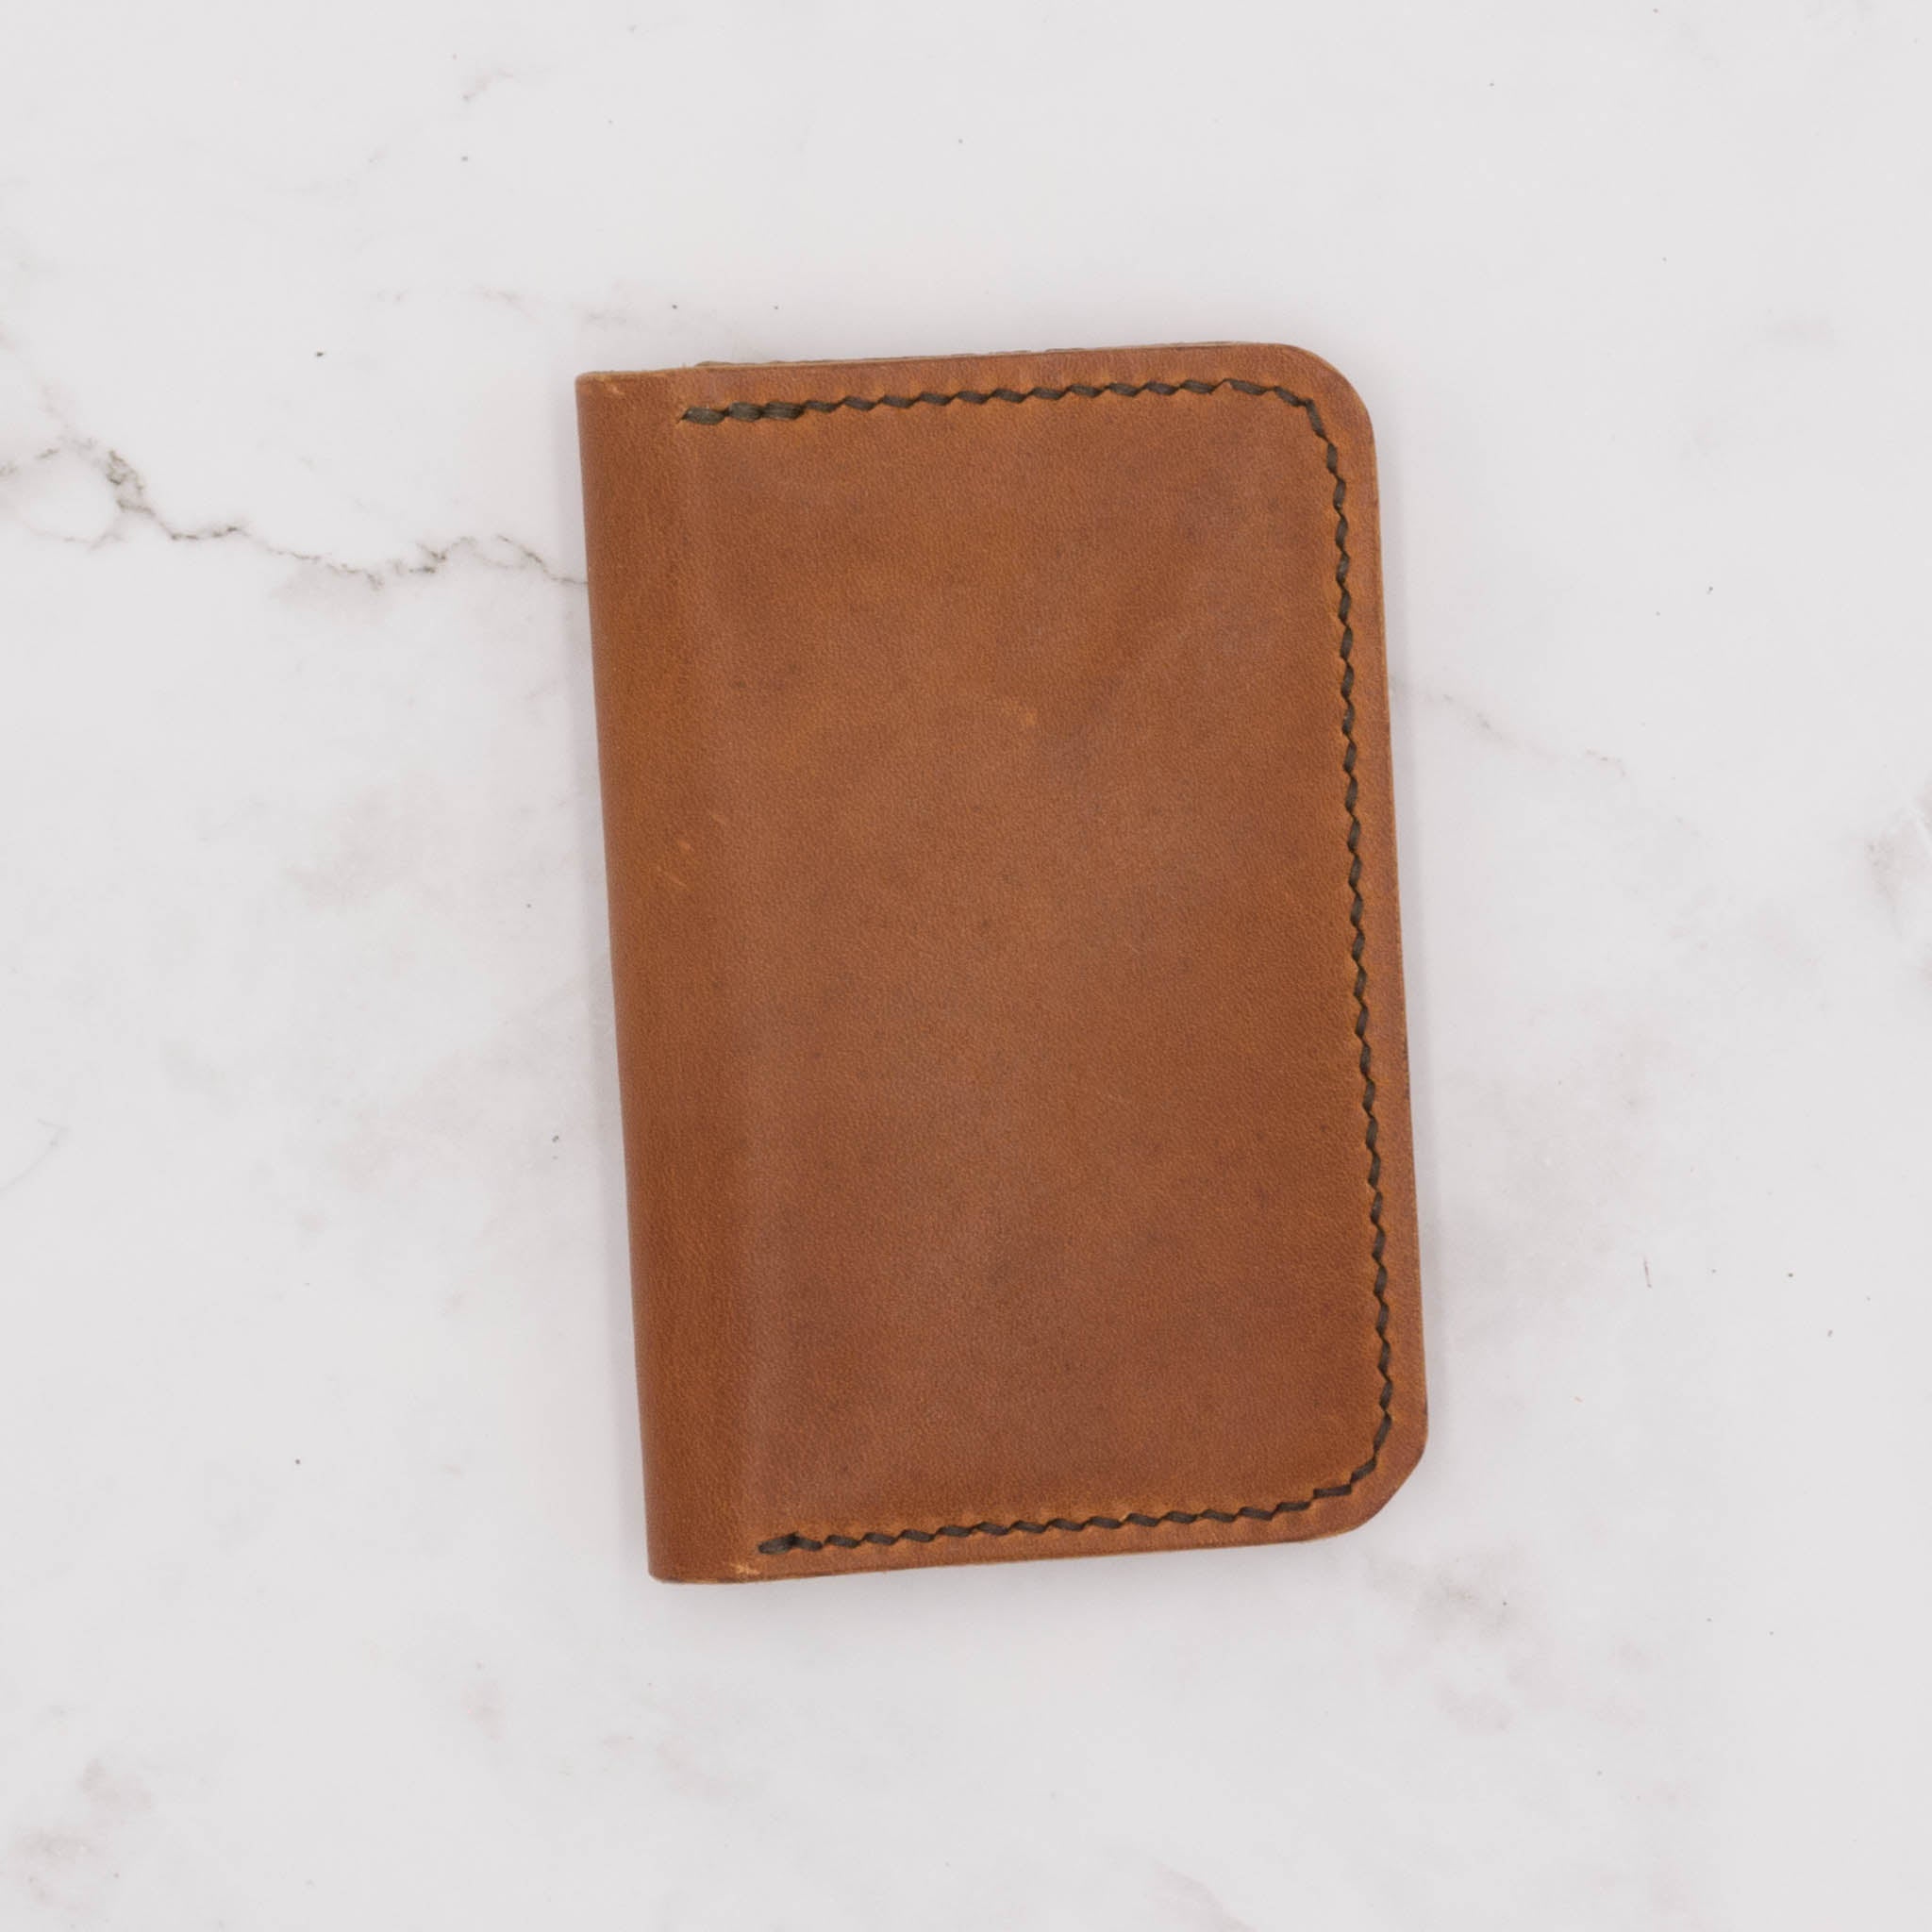 Handcrafted Slim Leather Bifold Wallet - English Tan